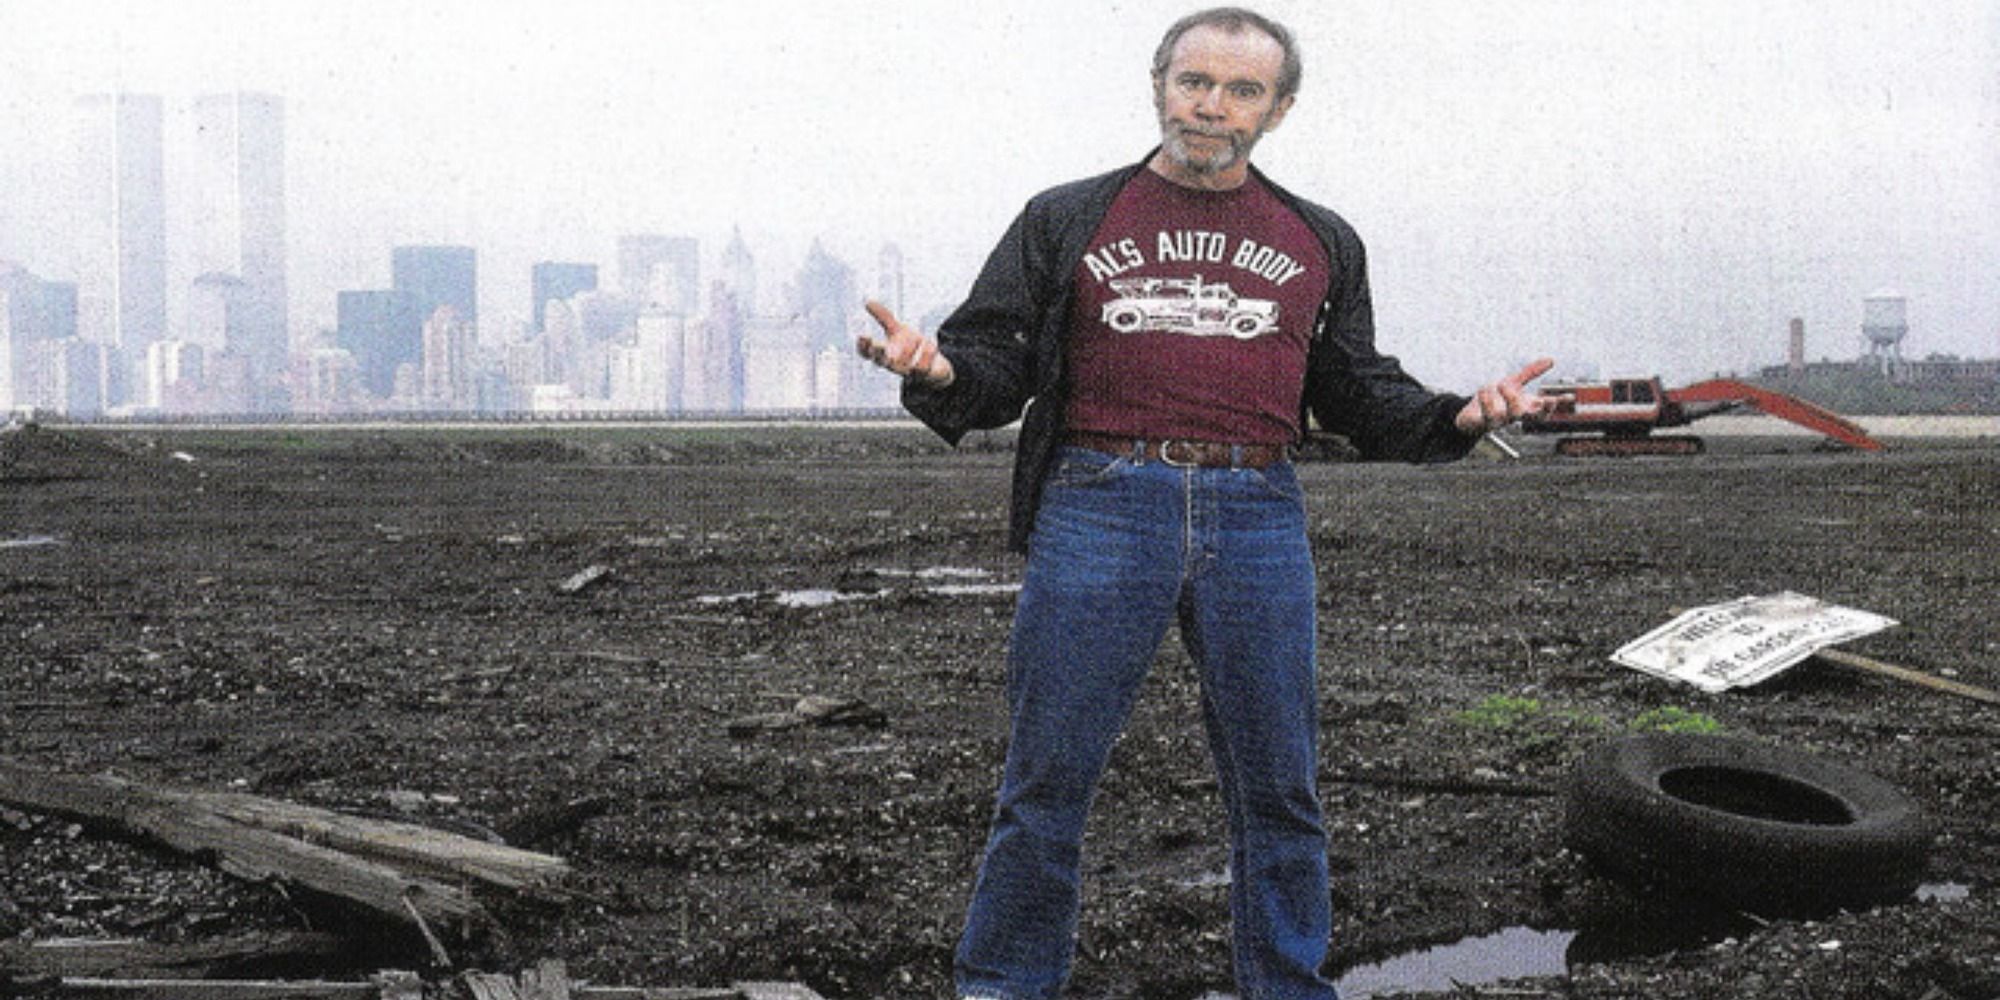 What Am I Doing in New Jersey (1988) George Carlin album cover